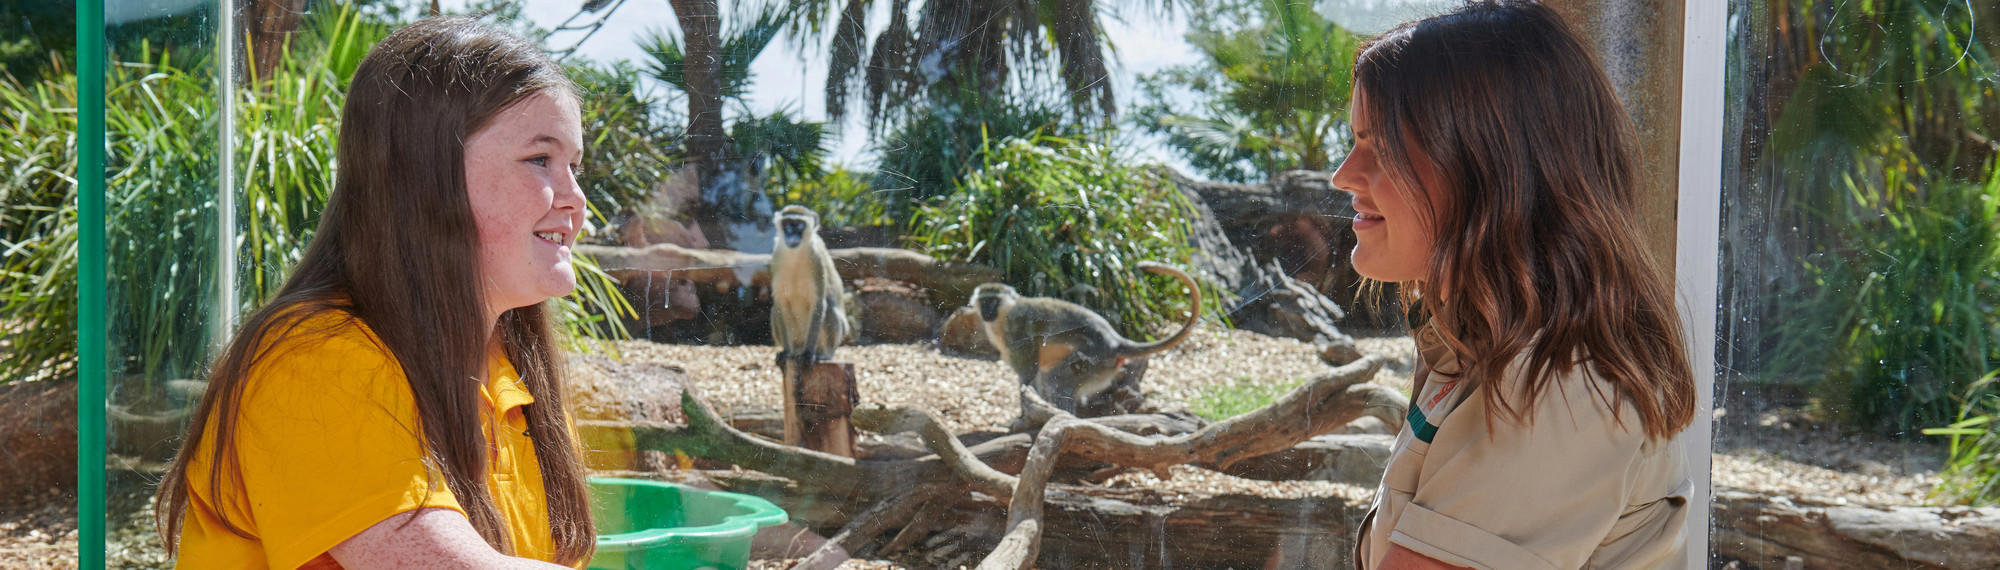 A zoo member of staff sits with a school student in front of the Ververt monkey exhibit, with two monkeys visible behind the glass